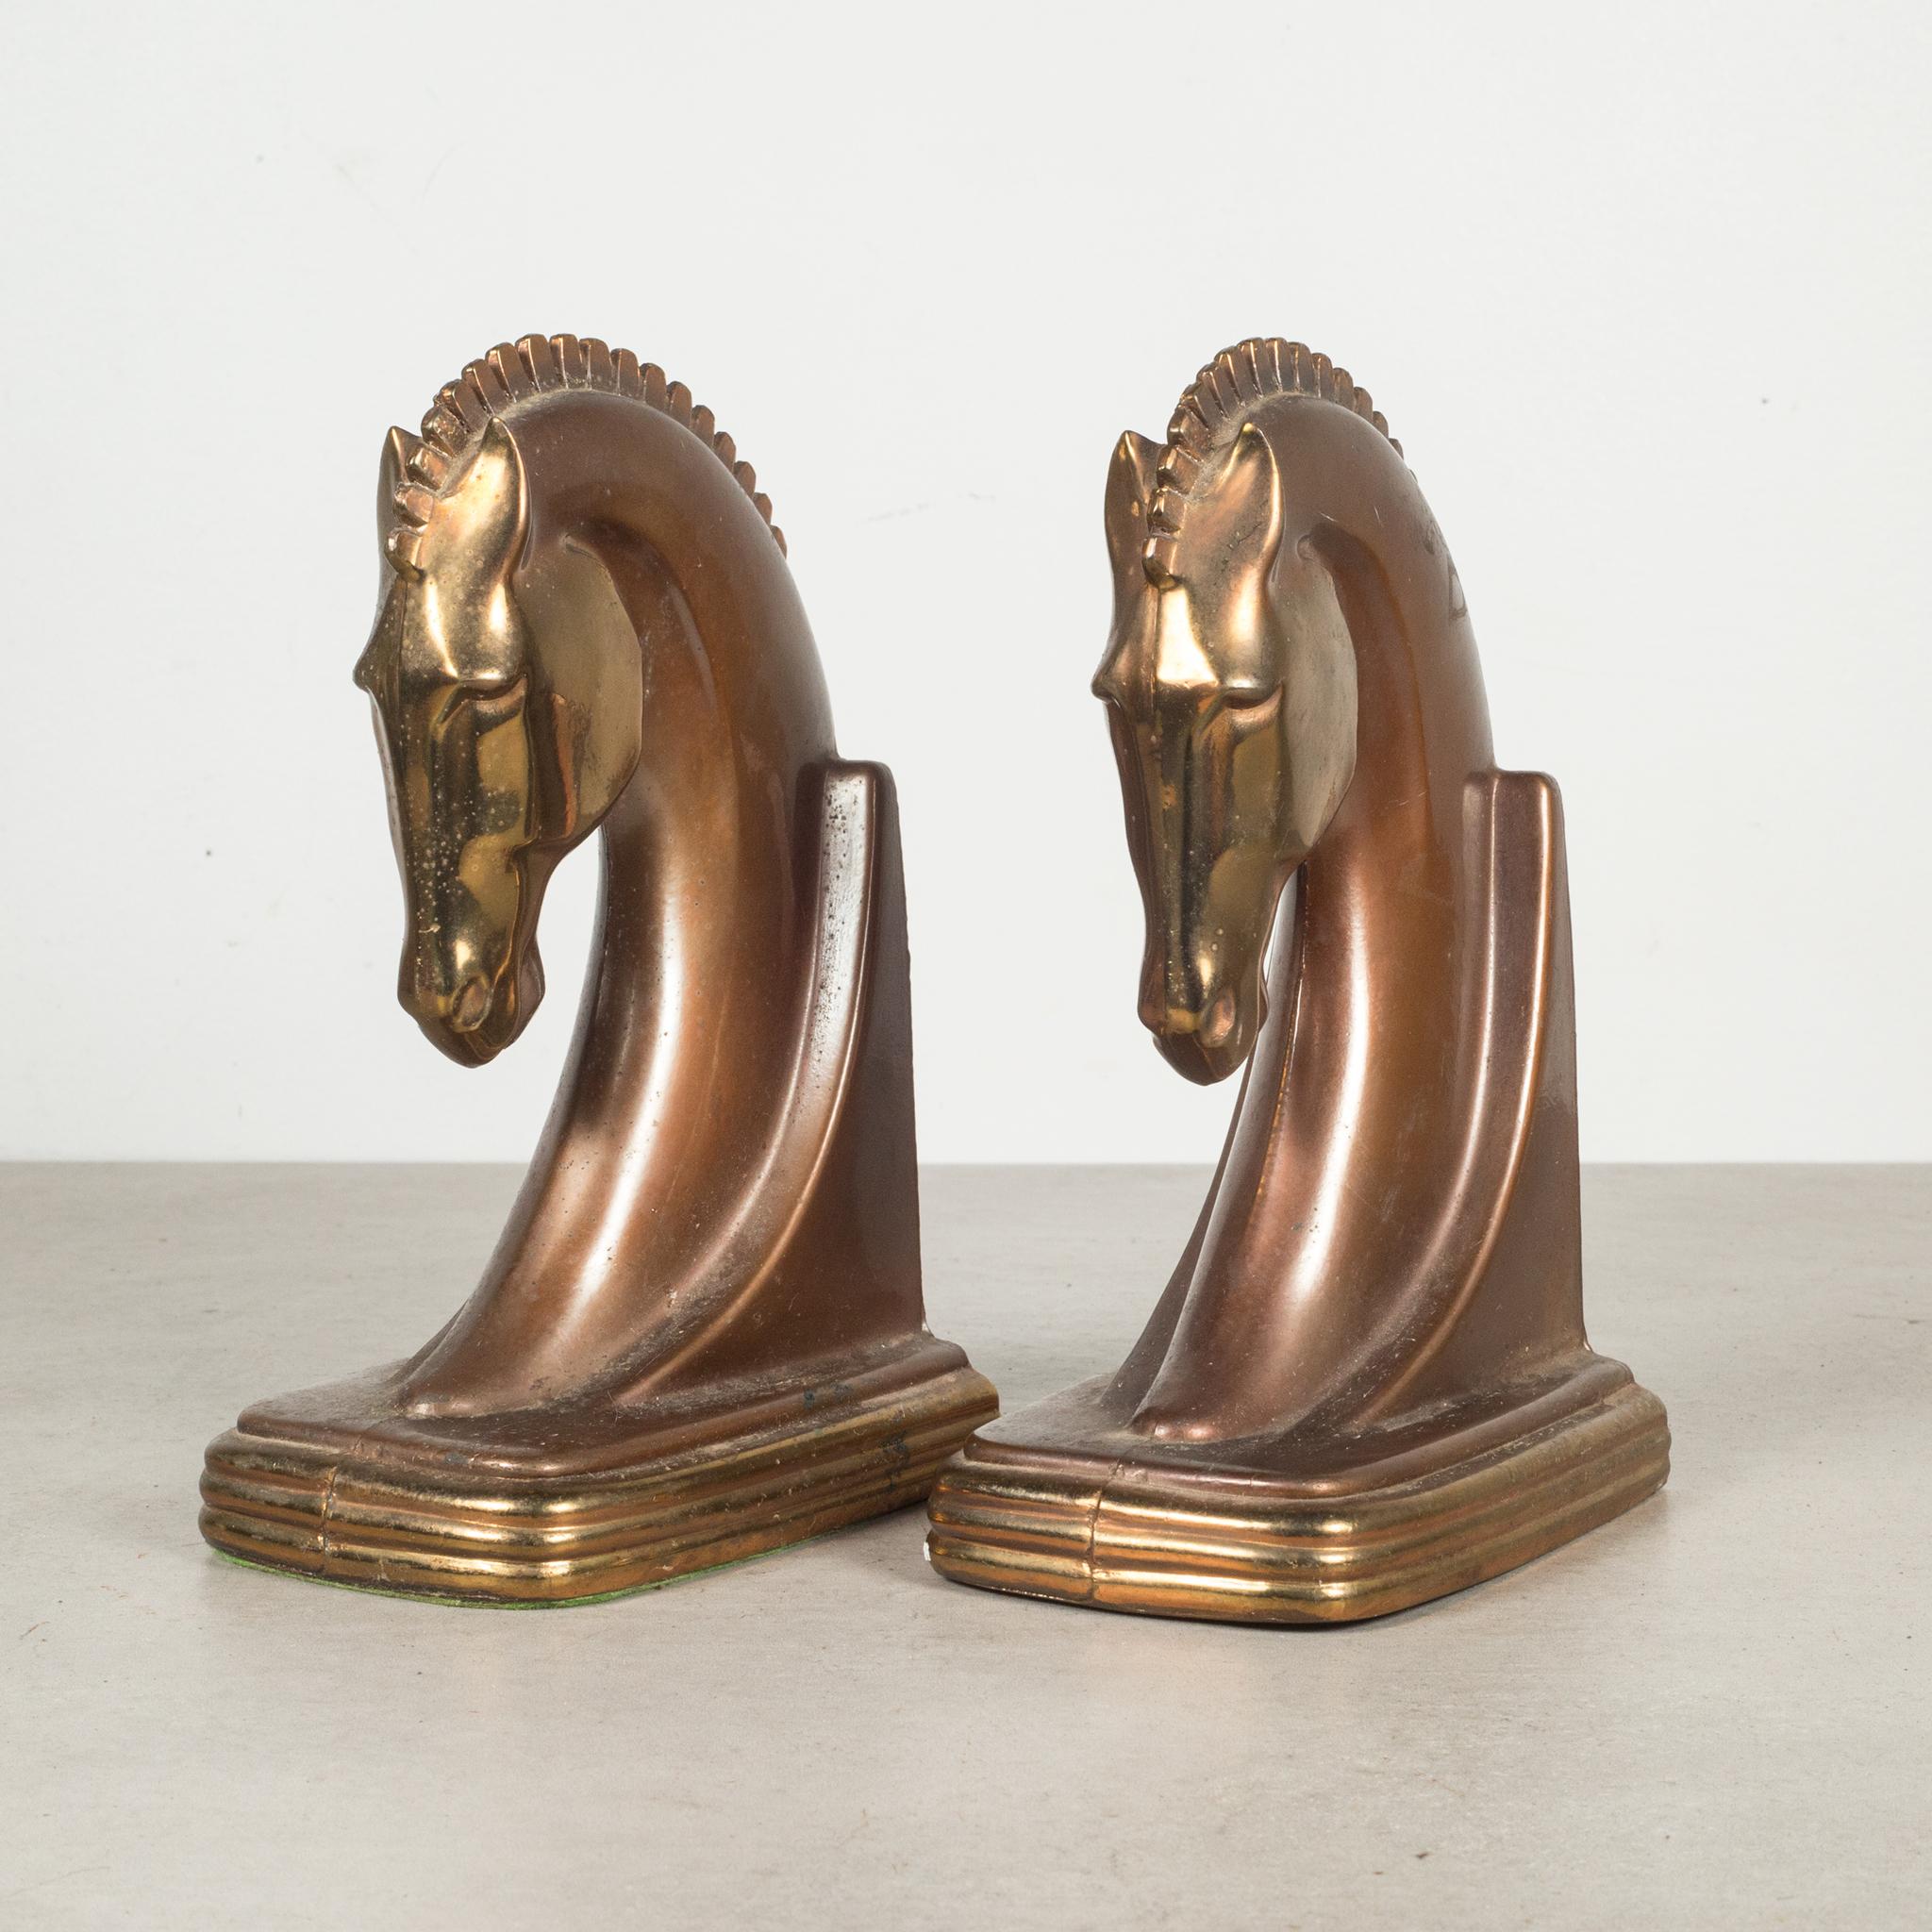 About

An original pair of Art Deco cast metal Trojan horse bookends manufactured by Dodge Trophy Inc. Los Angeles California USA. Both pieces have retained their original bronze and copper finish and are in good condition with appropriate patina